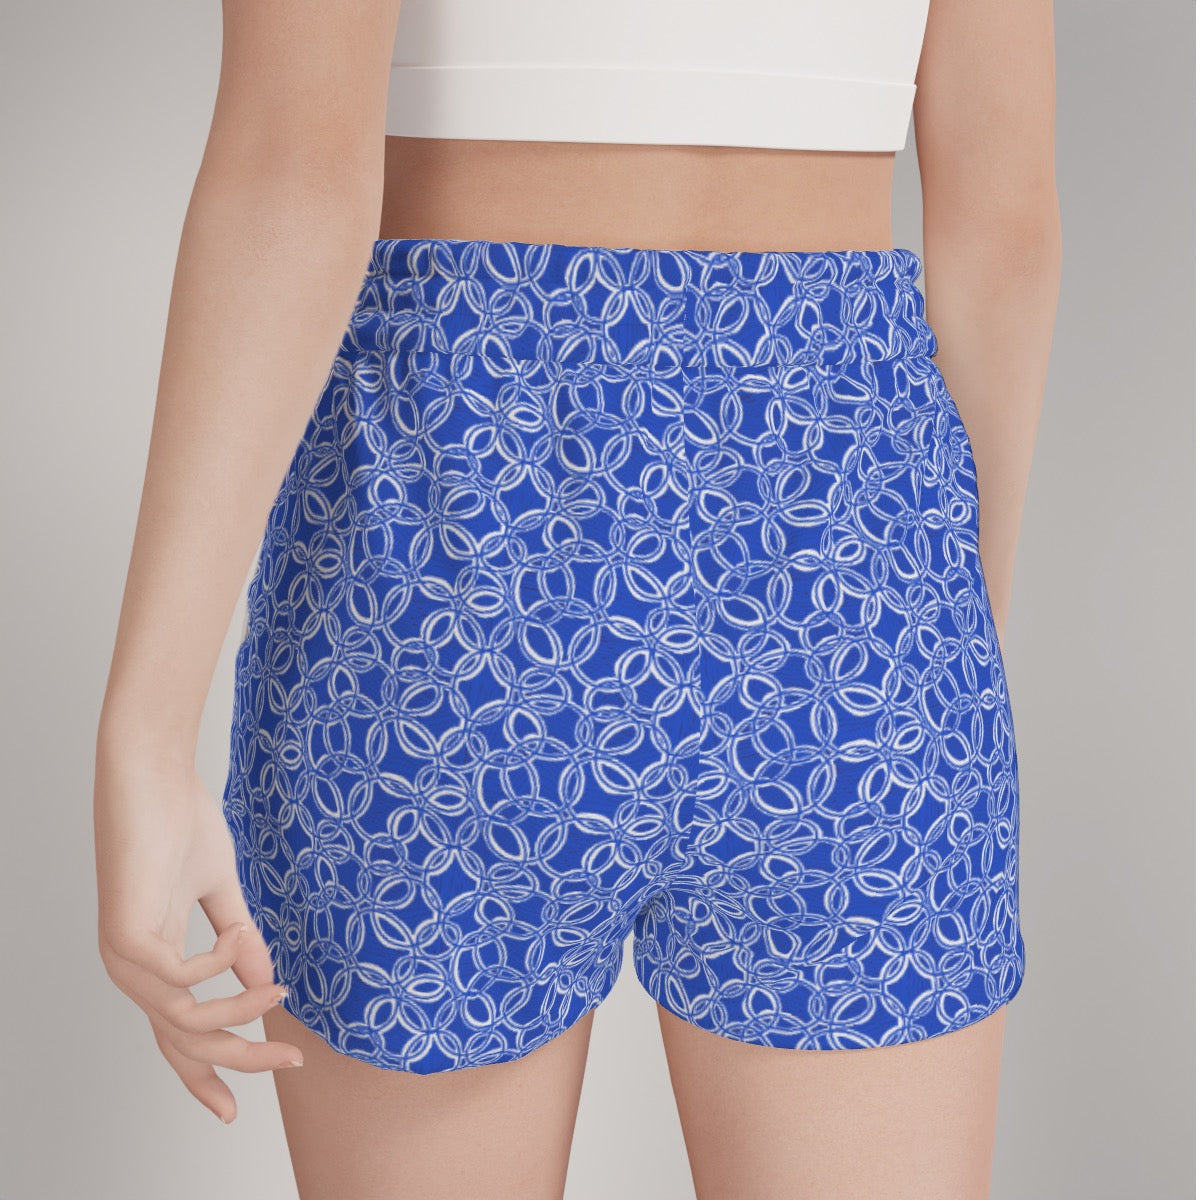 Geometrical Blue & White Women's Casual Shorts. Pattern hand-painted by the Designer Maria Alejandra Echenique